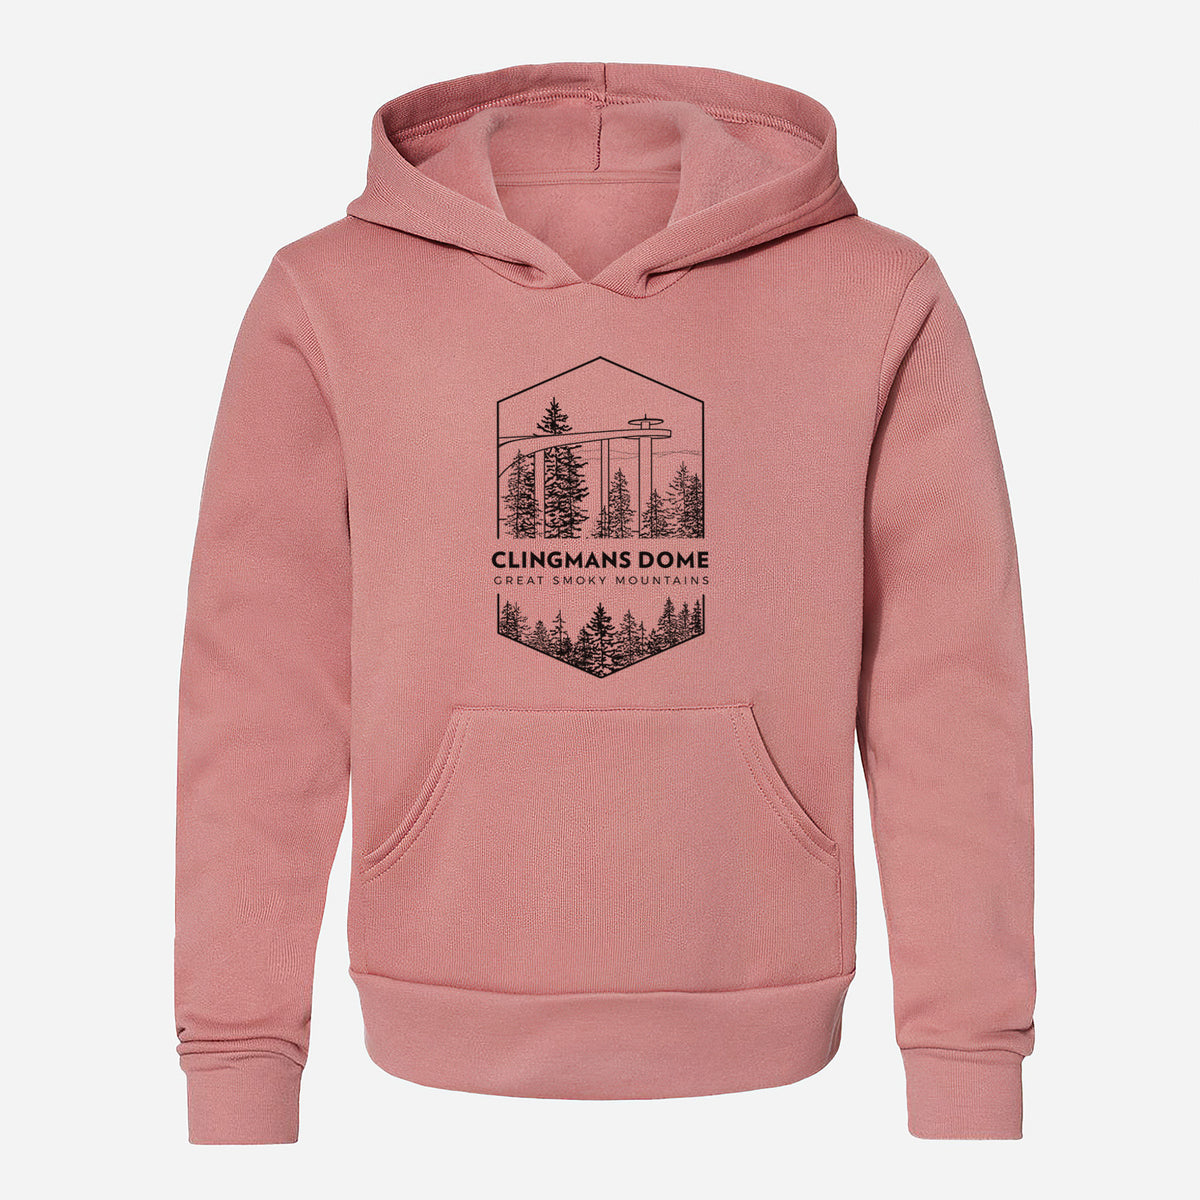 Clingmans Dome - Great Smoky Mountains National Park - Youth Hoodie Sweatshirt